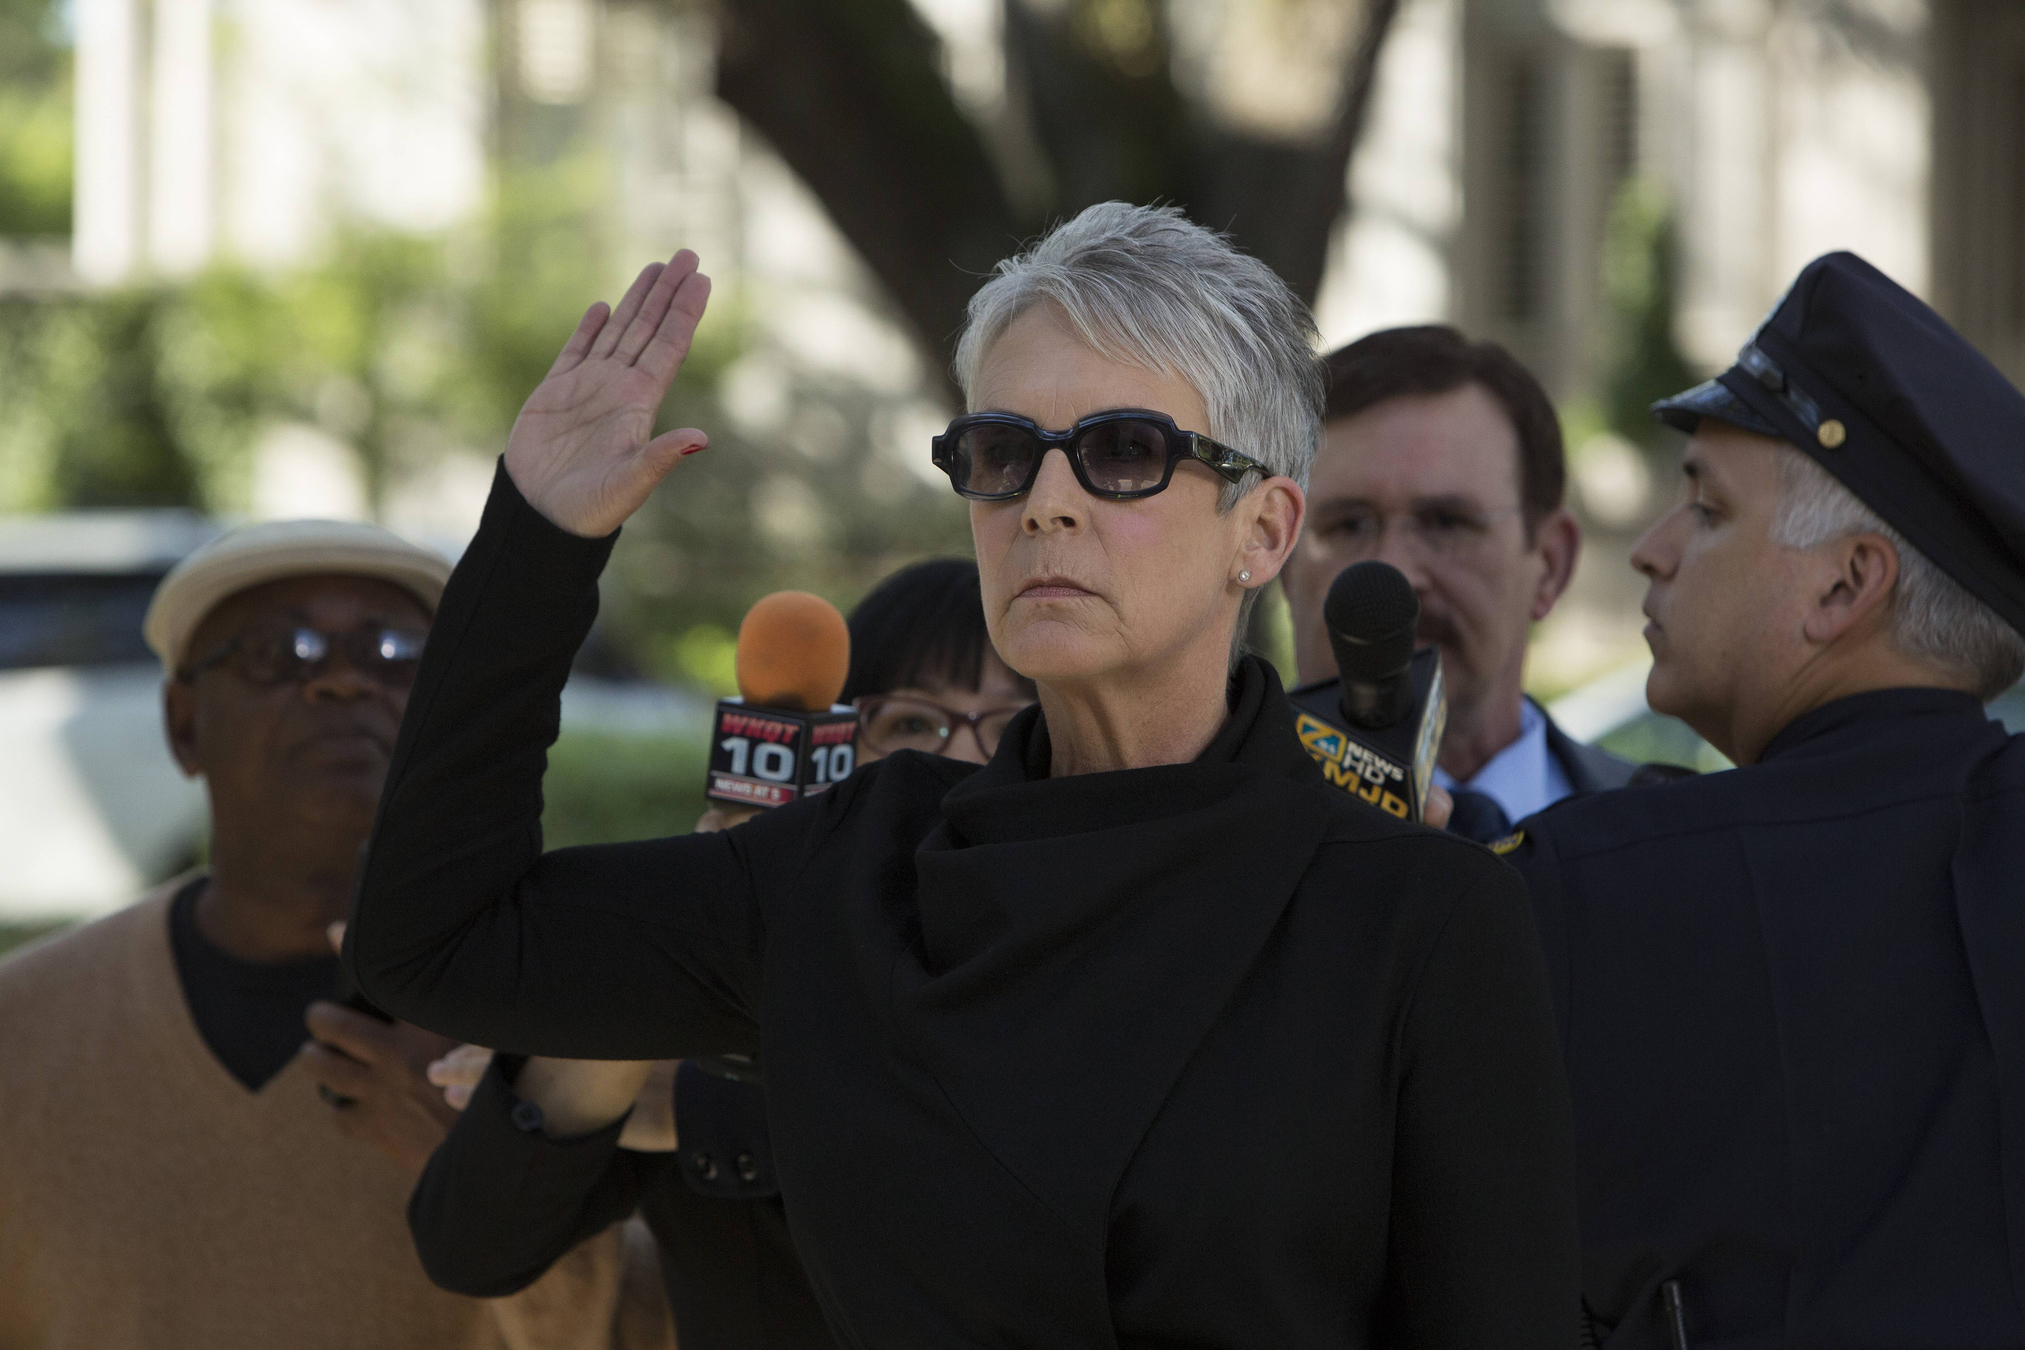 SCREAM QUEENS: Jamie Lee Curtis as Dean Cathy Munsch in "Pilot," the first part of the special, two-hour series premiere of SCREAM QUEENS airing Tuesday, Sept. 22 (8:00-10:00 PM ET/PT) on FOX. ©2015 Fox Broadcasting Co. Cr: Steve Dietl/FOX.